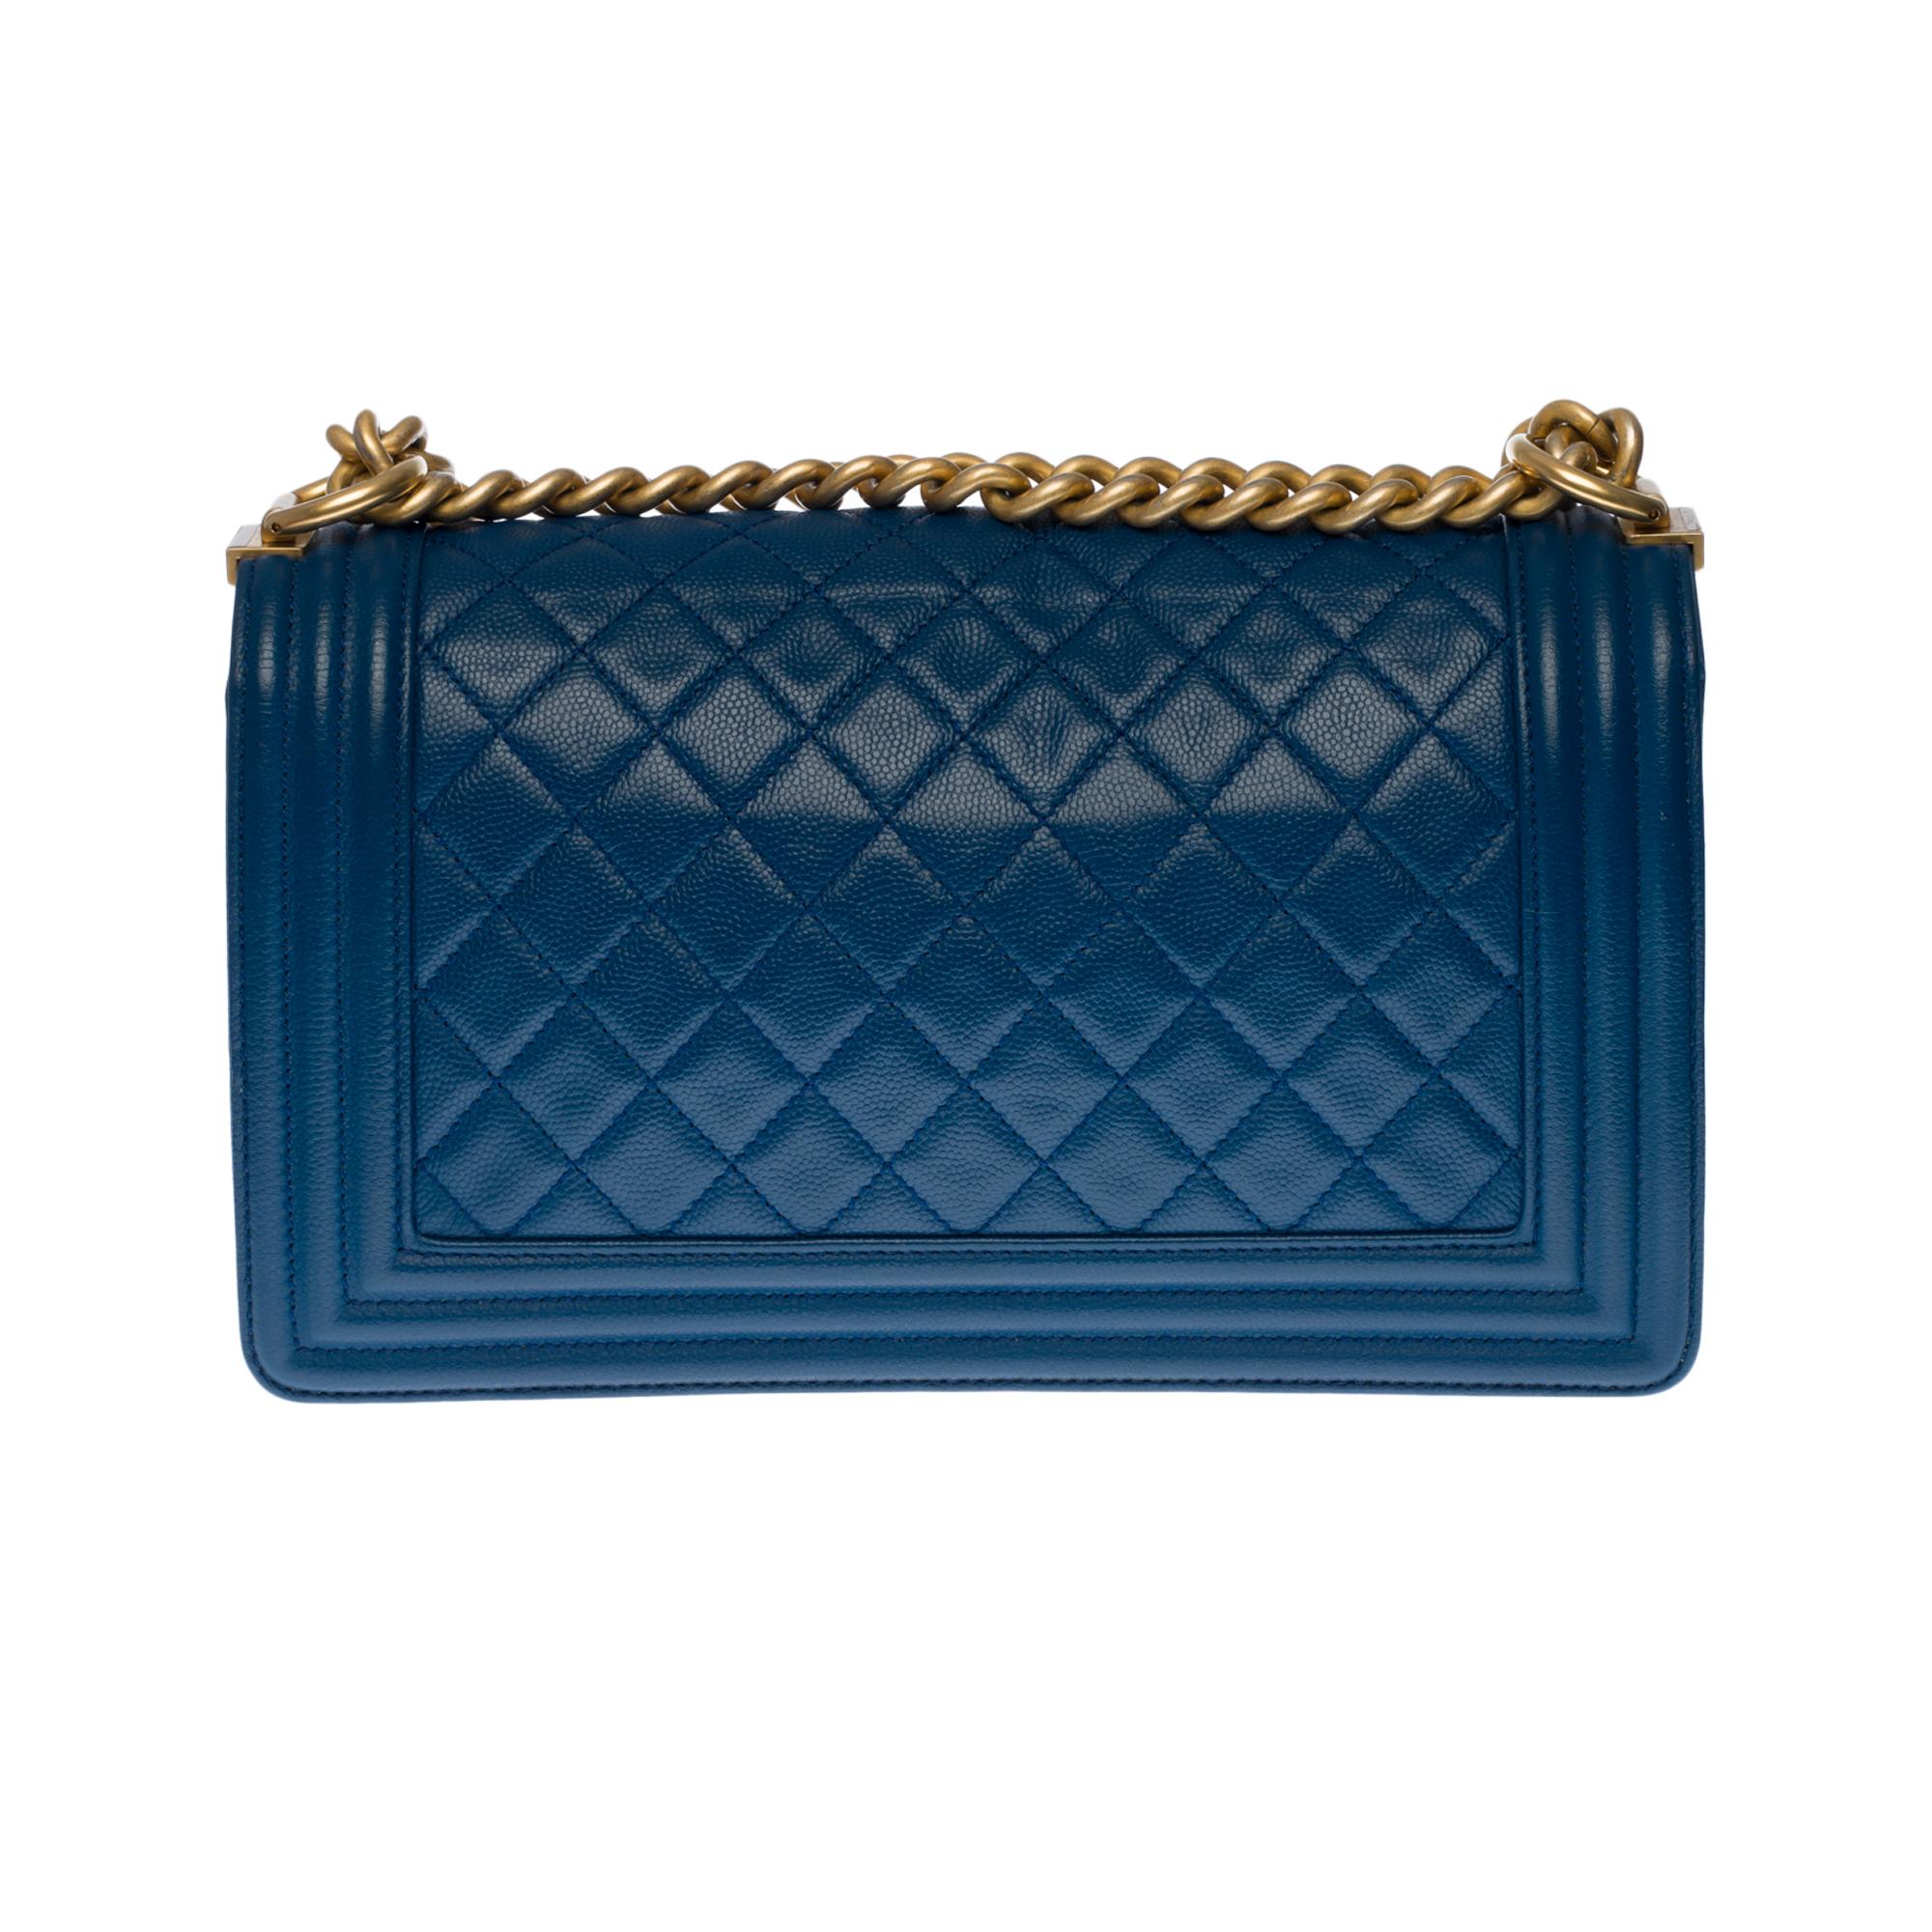 The iconic Chanel Boy Old Medium shoulder bag in blue quilted caviar leather with matte gold metal hardware, an adjustable chain handle in matte gold metal allowing a shoulder or shoulder strap.
A matte gold-tone metal logo closure on the